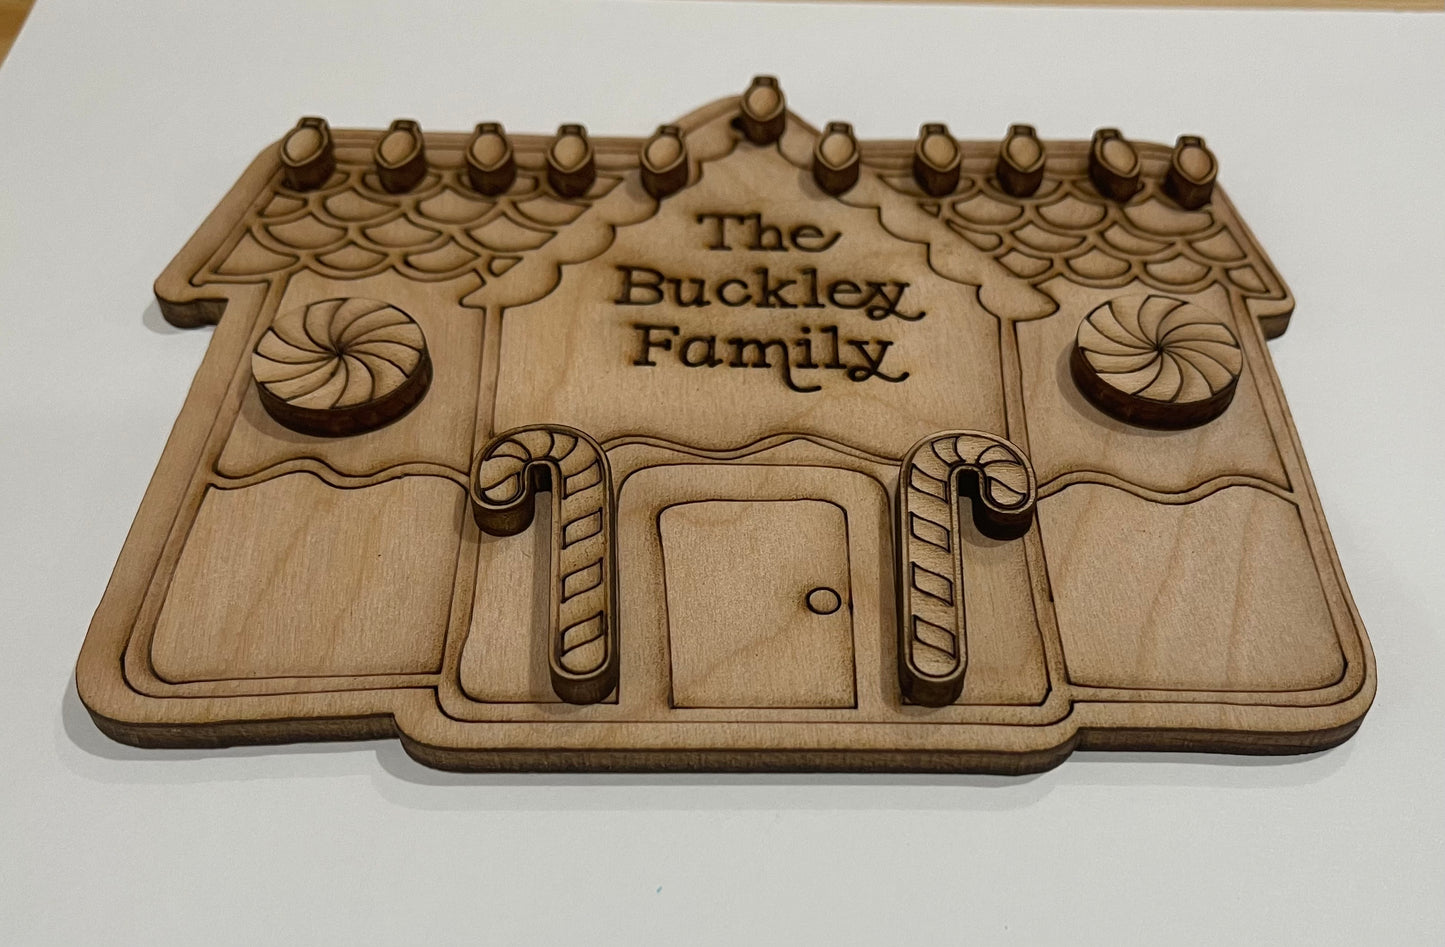 Gingerbread House and Family Ornament Set. Unfinished wood ornament